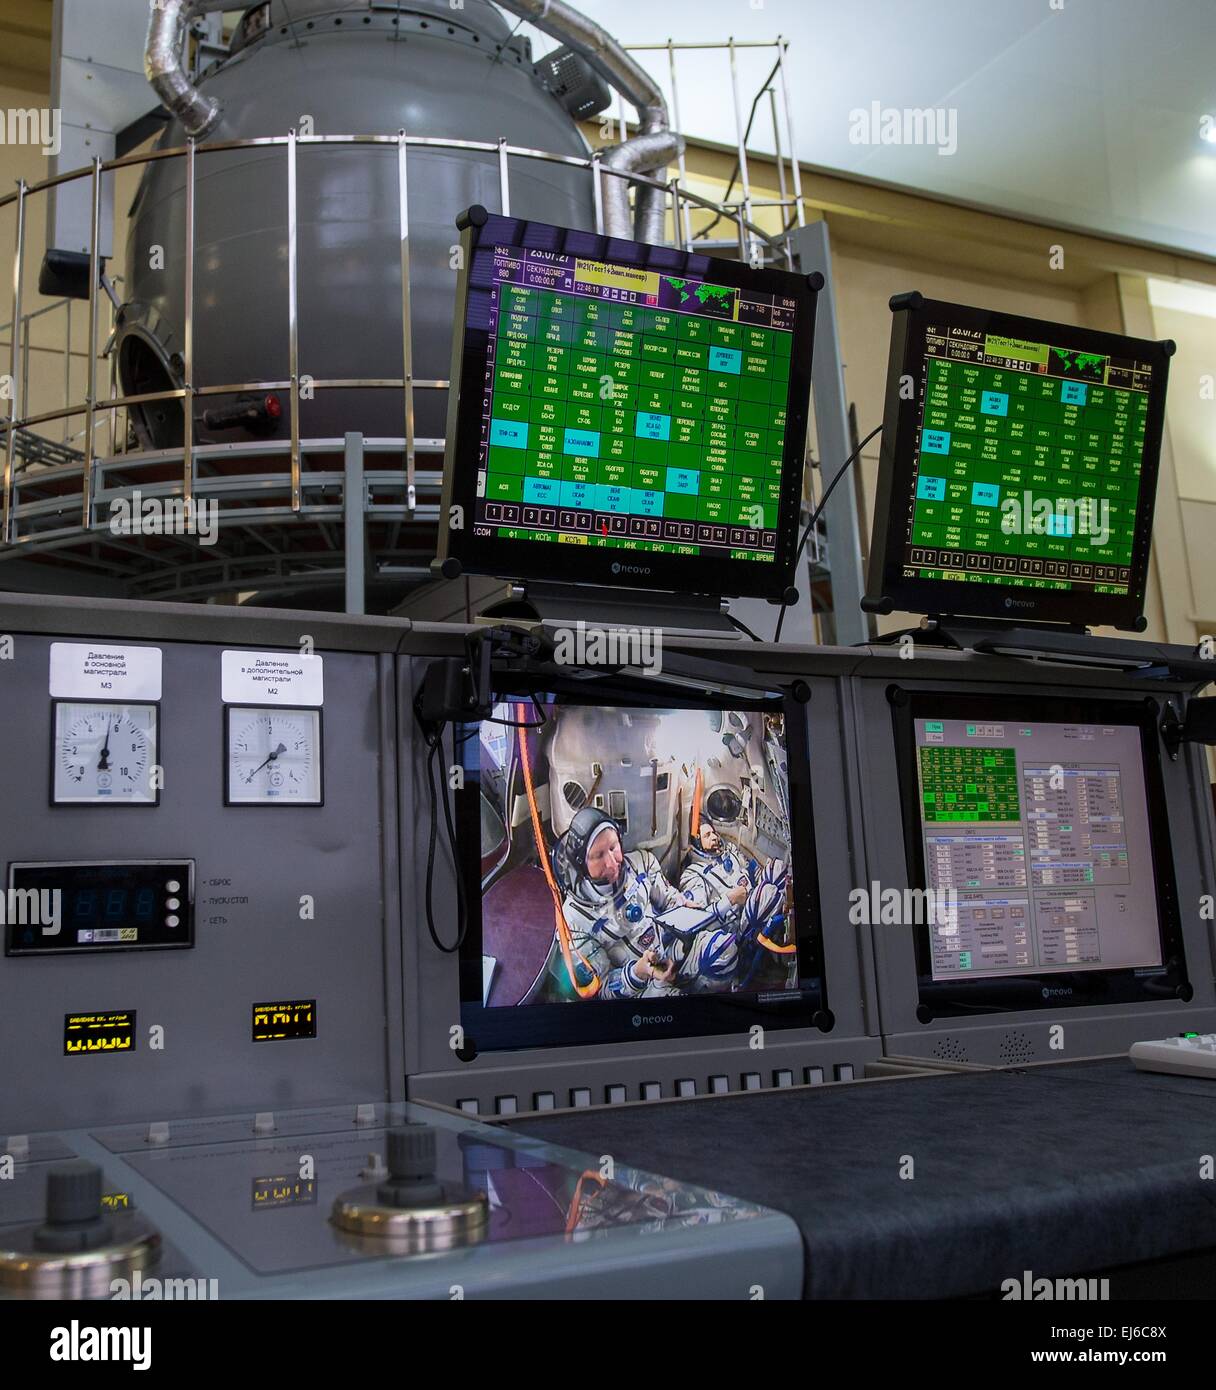 International Space Station Expedition 43 Cosmonauts Gennady Padalka and Mikhail Kornienko of the Russian Federal Space Agency sit inside the Soyuz simulator as seen from the control room monitors at the Gagarin Cosmonaut Training Center March 8, 2015 in Star City, Russia. Gennady Padalka and Mikhail Kornienk and Scott Kelly will launch aboard the Soyuz spacecraft March 28th for a one-year mission. Stock Photo